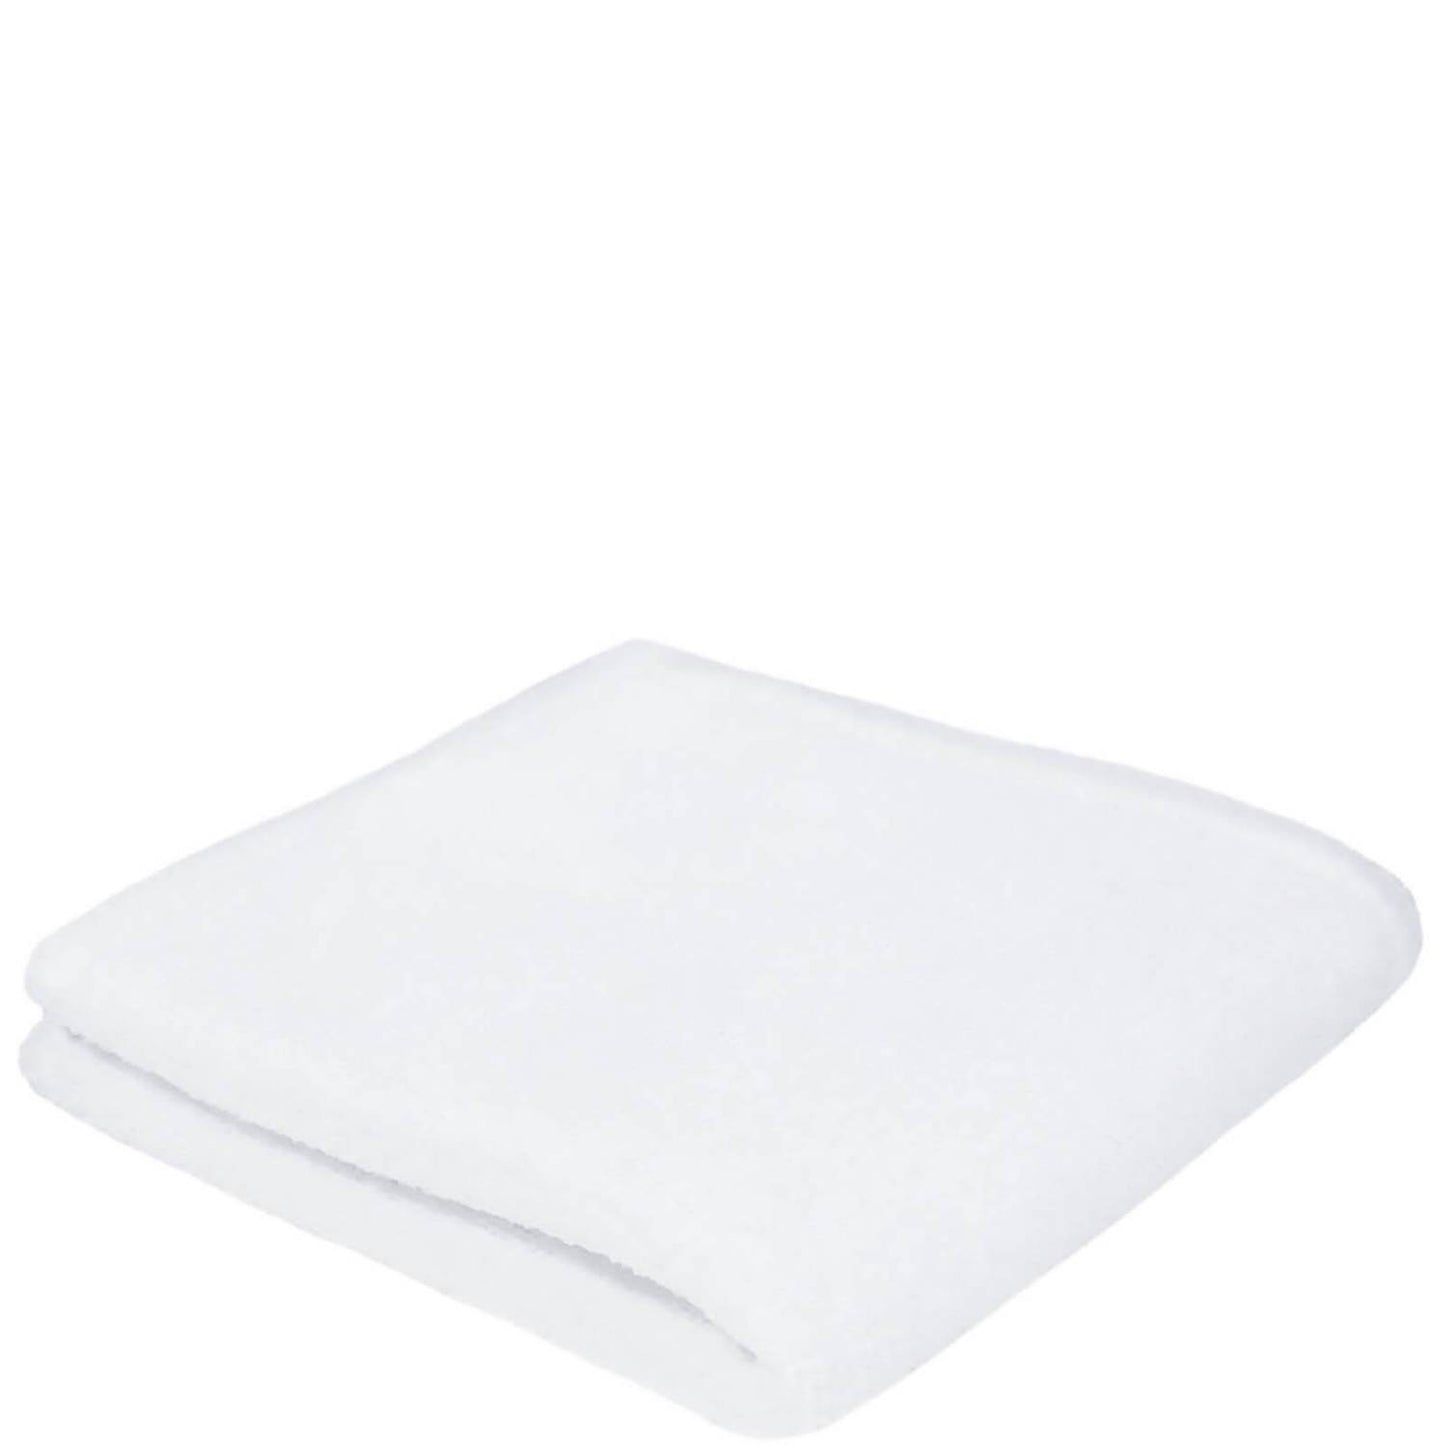 Wishful by Huda Beauty | Microfibre Cleansing Cloth Quad